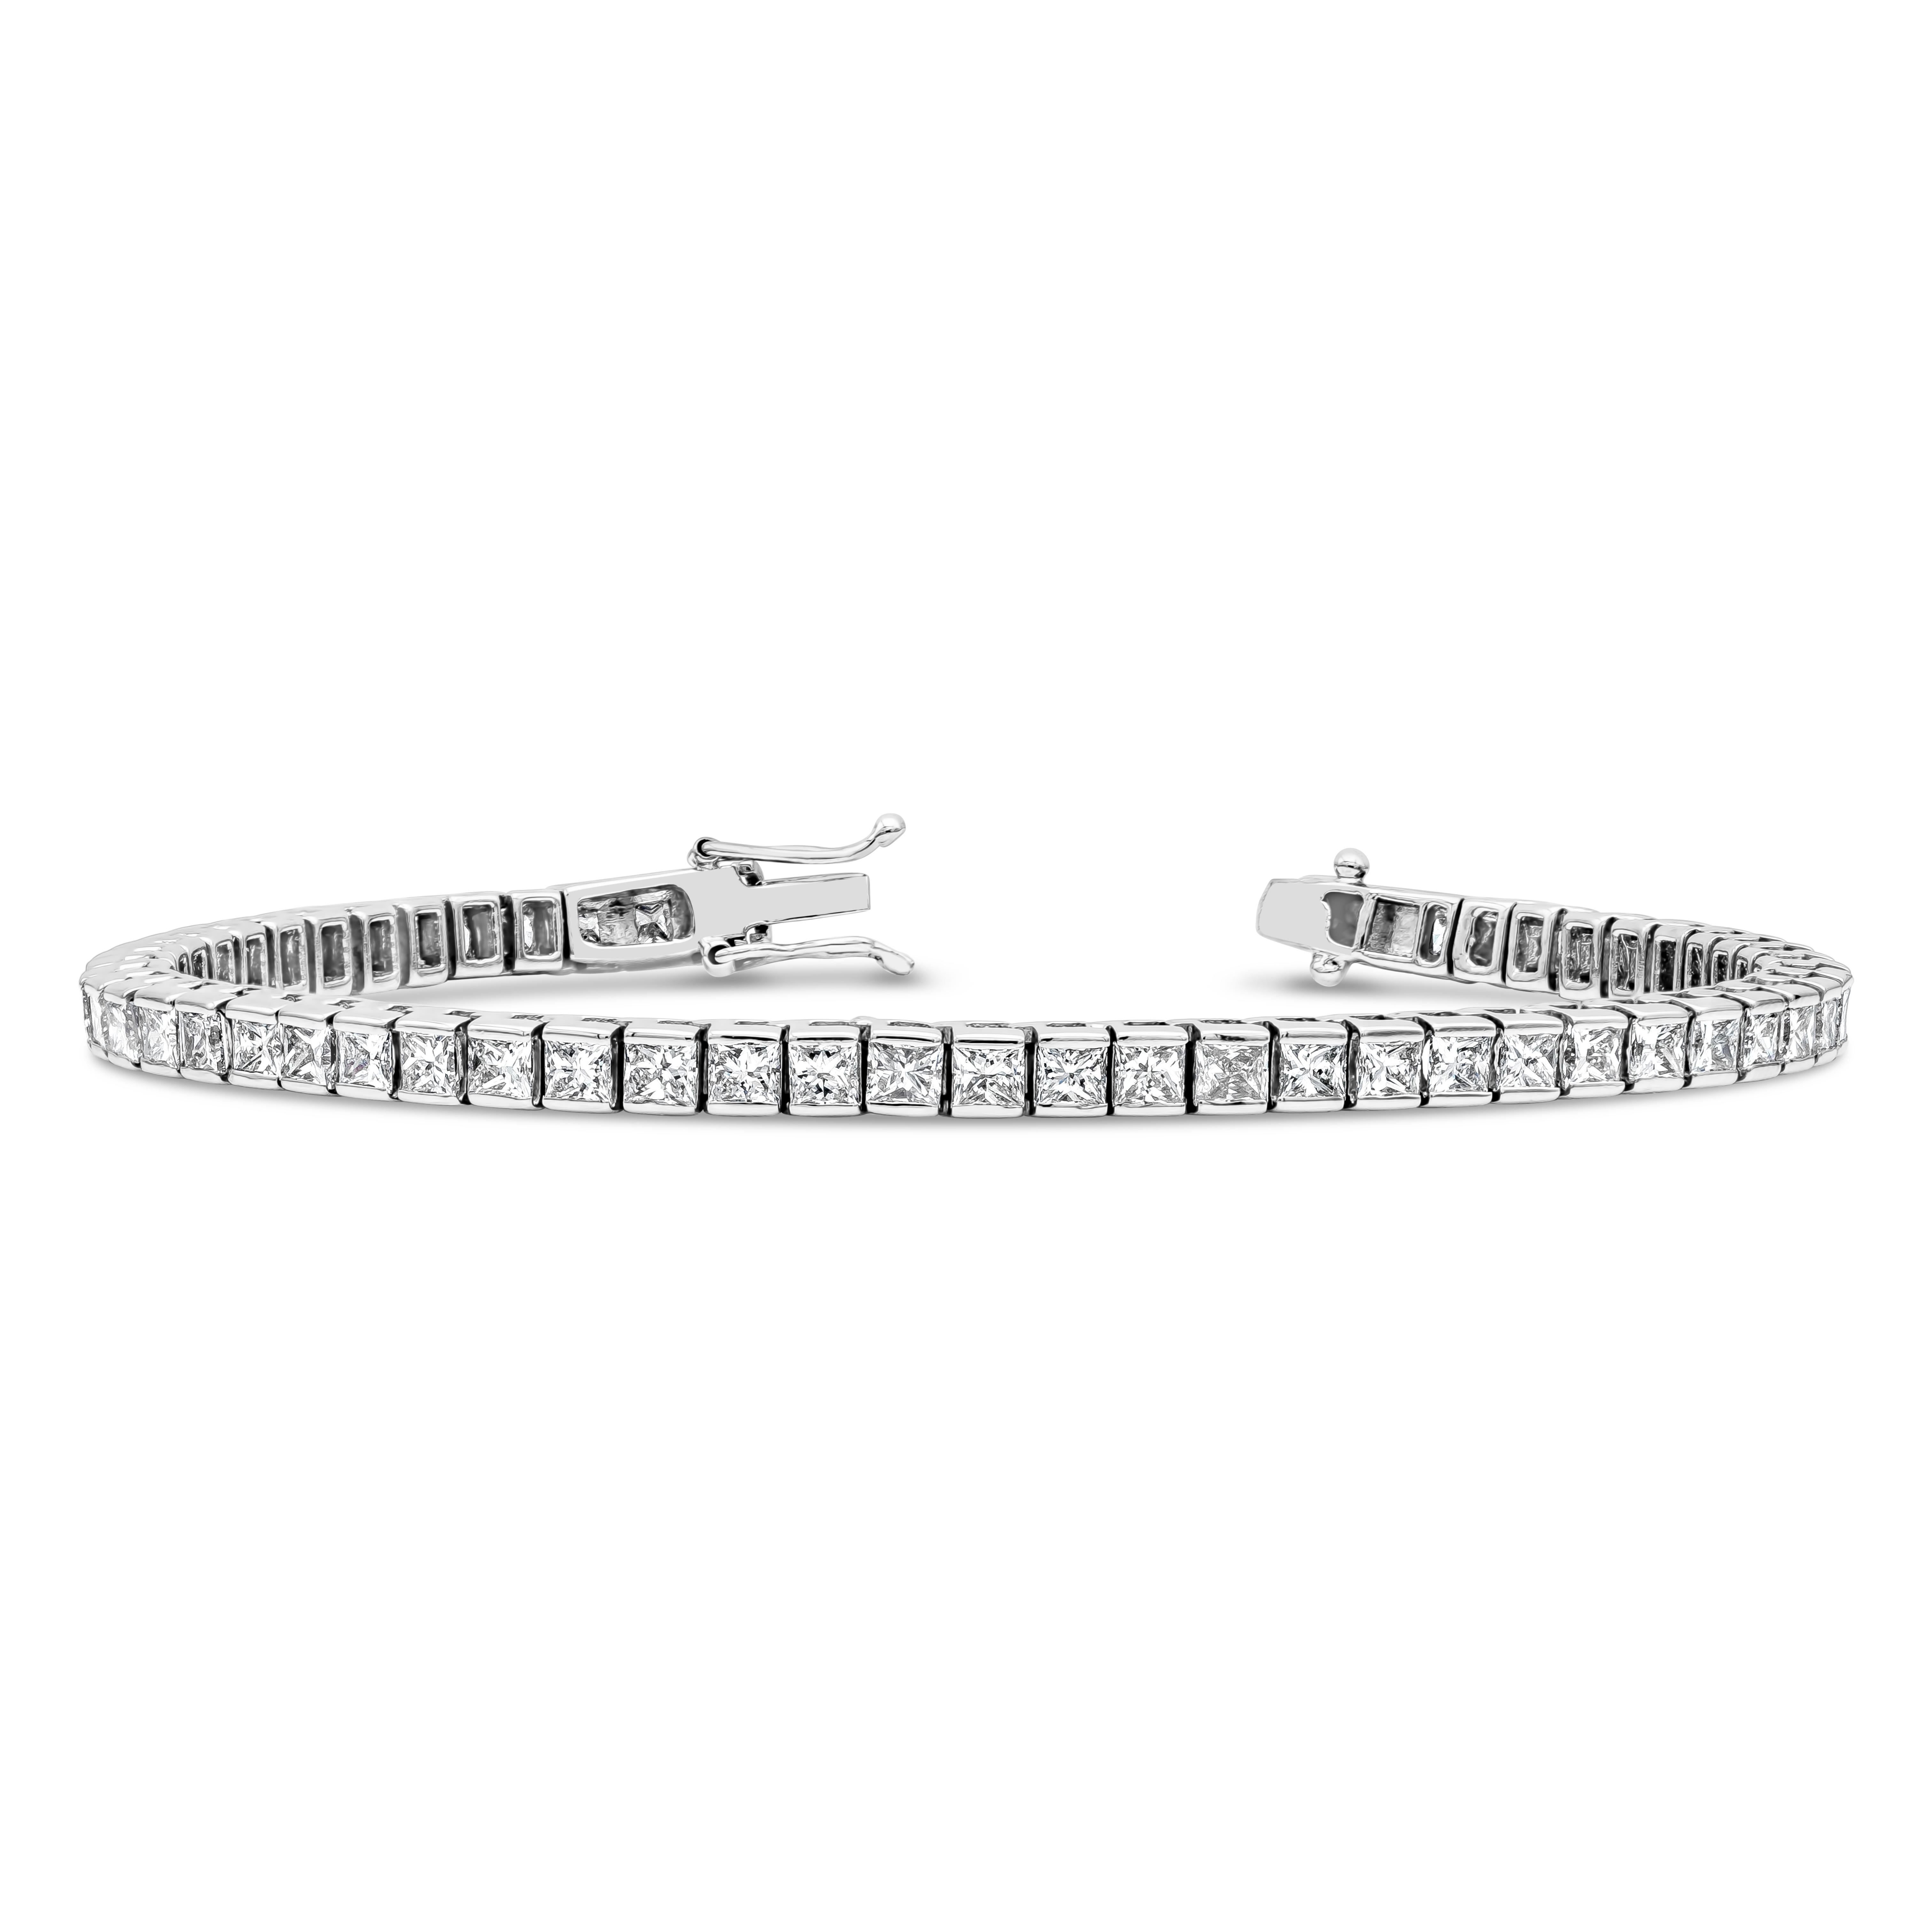 A classic tennis bracelet style showcasing 56 princess cut diamonds weighing 8.42 carats total, F color and VS in clarity. Made with 18K White Gold. 7 inches in Length.